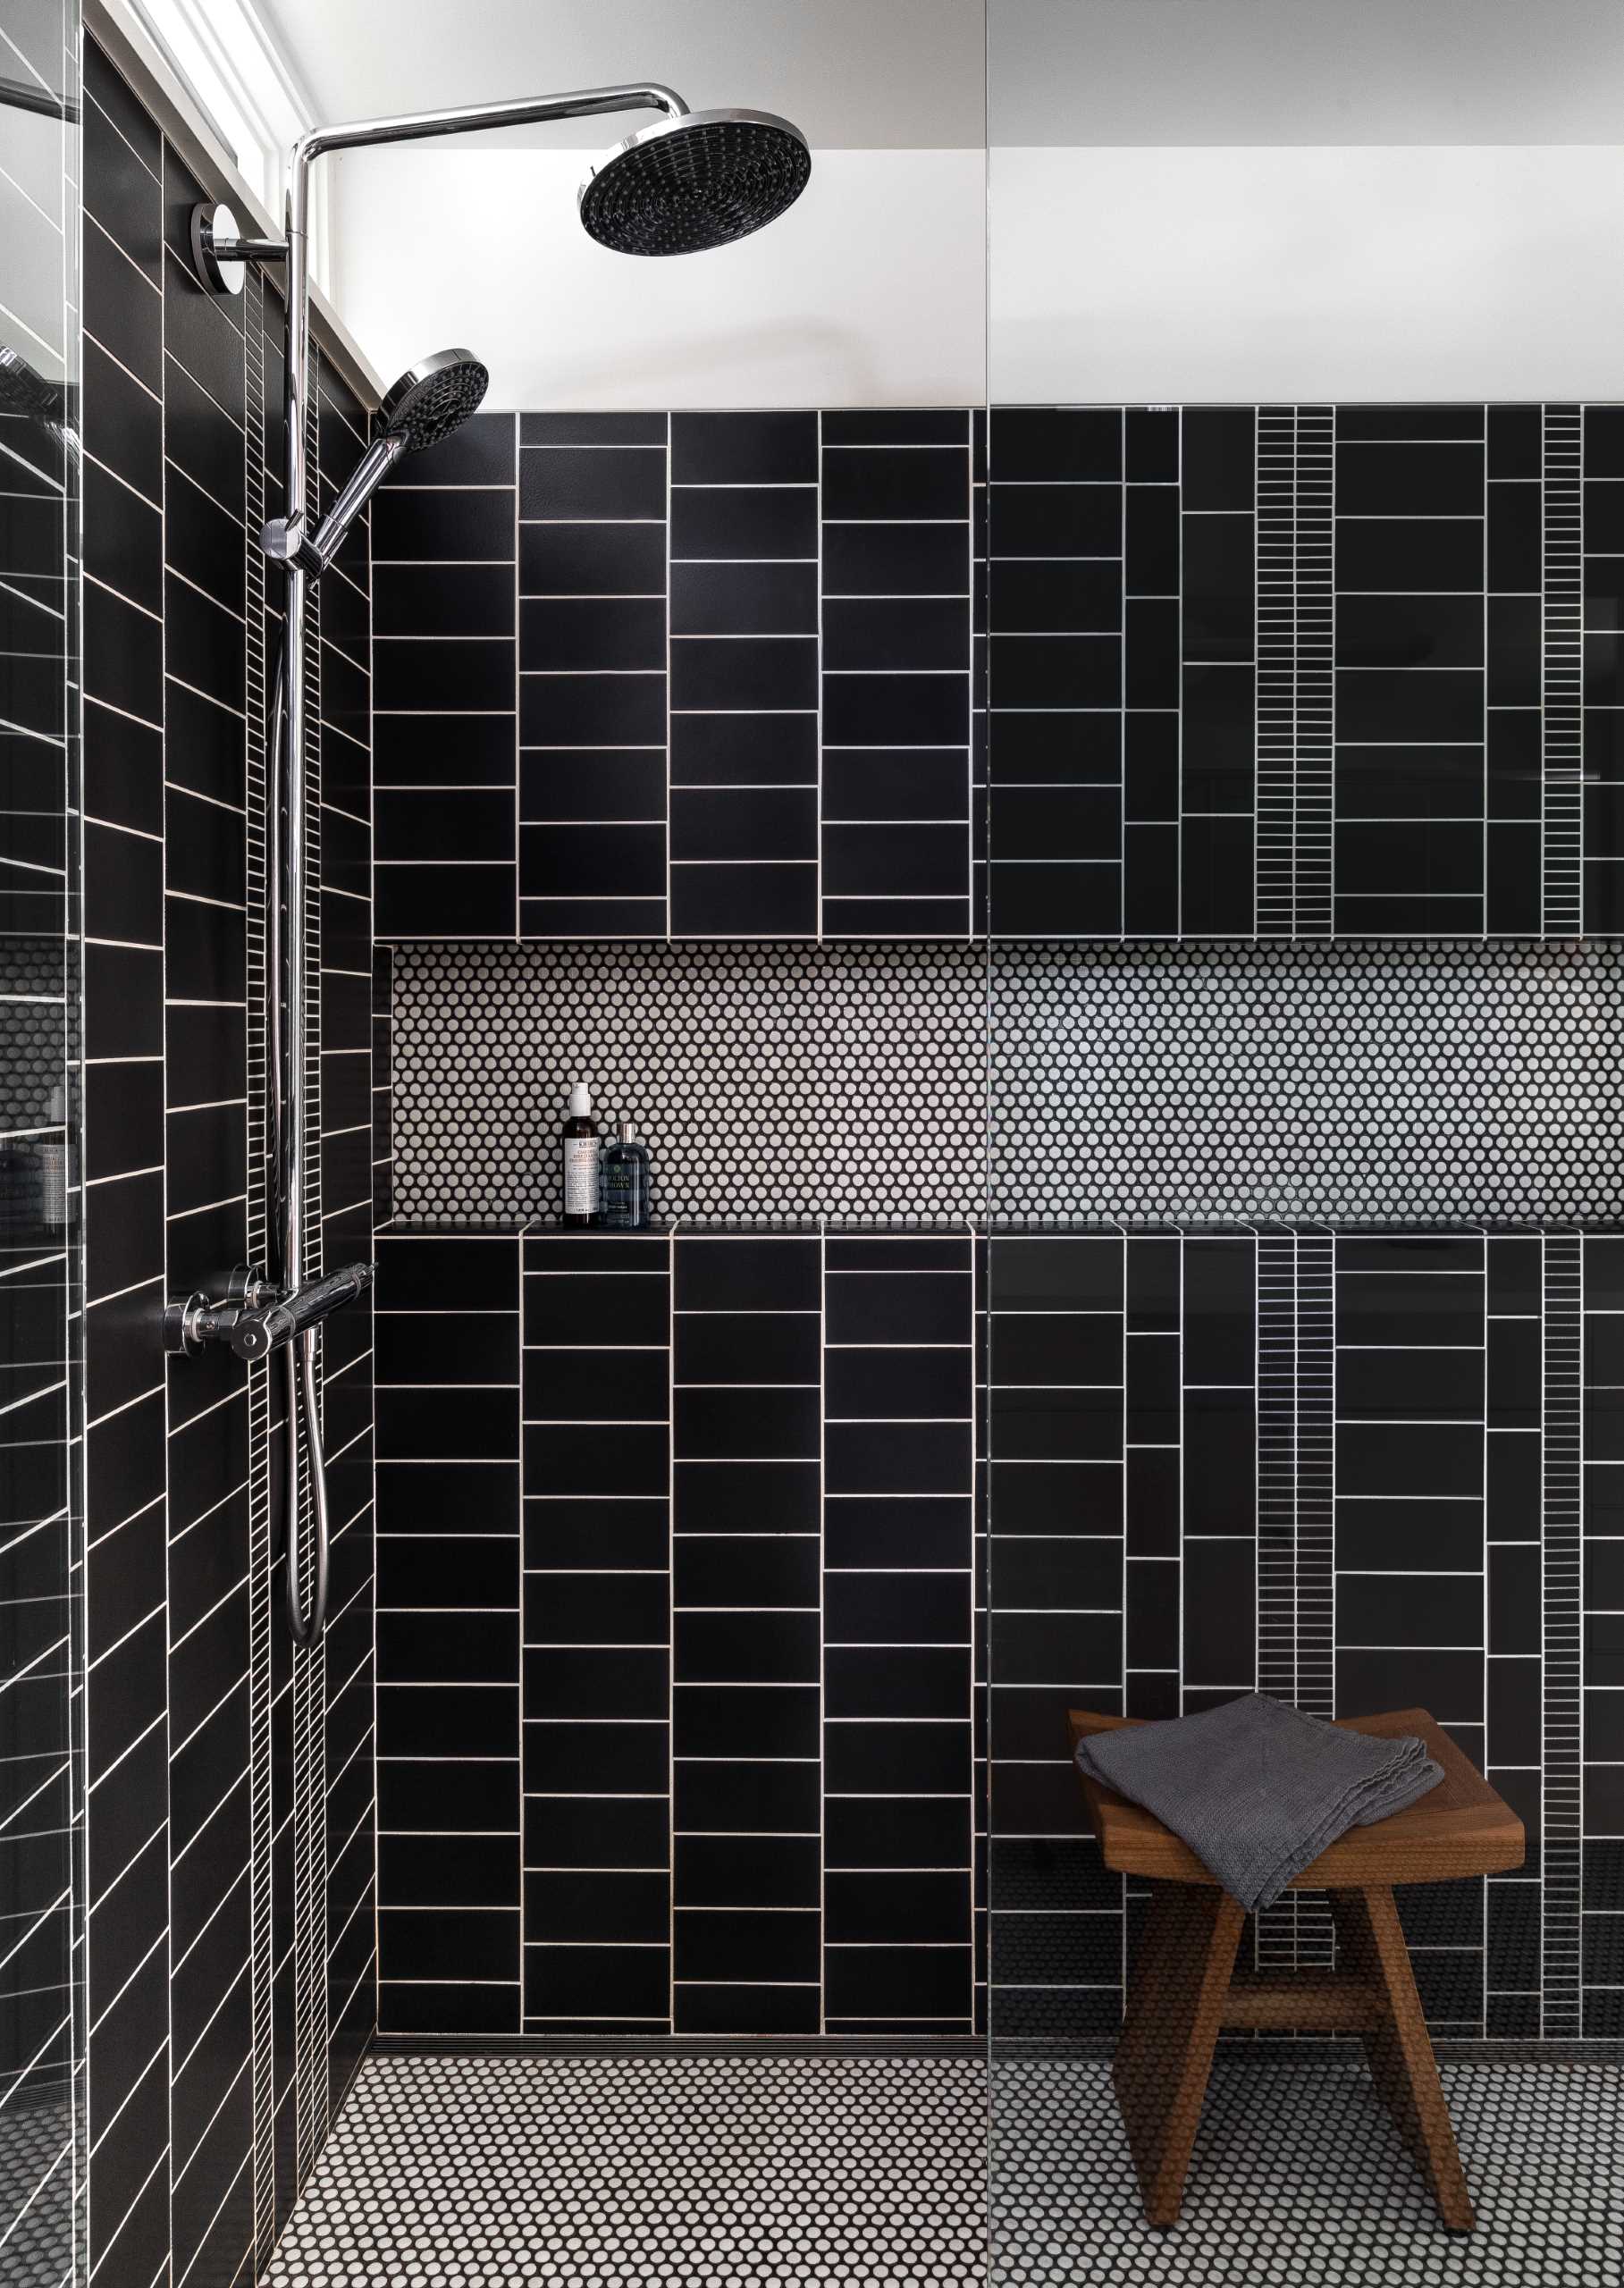 In this modern bathroom, black and white tiles have been chosen to line the shower, with contrasting grout allowing each tile shape to stand out.